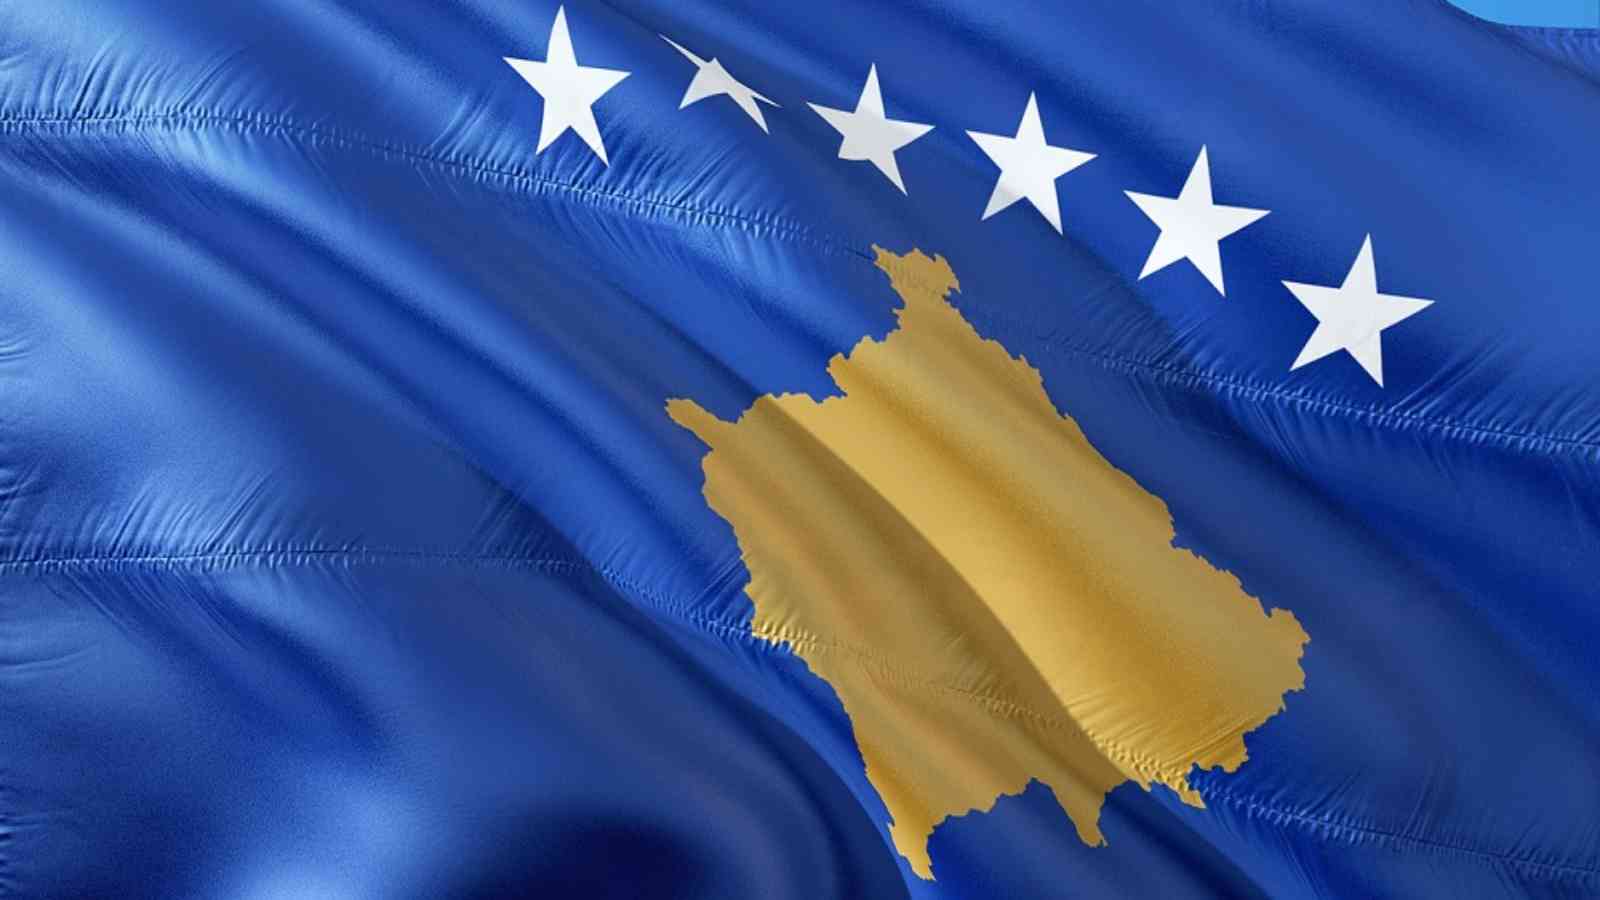 Day of Ashakalia 2023: Date, History, Facts about Kosovo